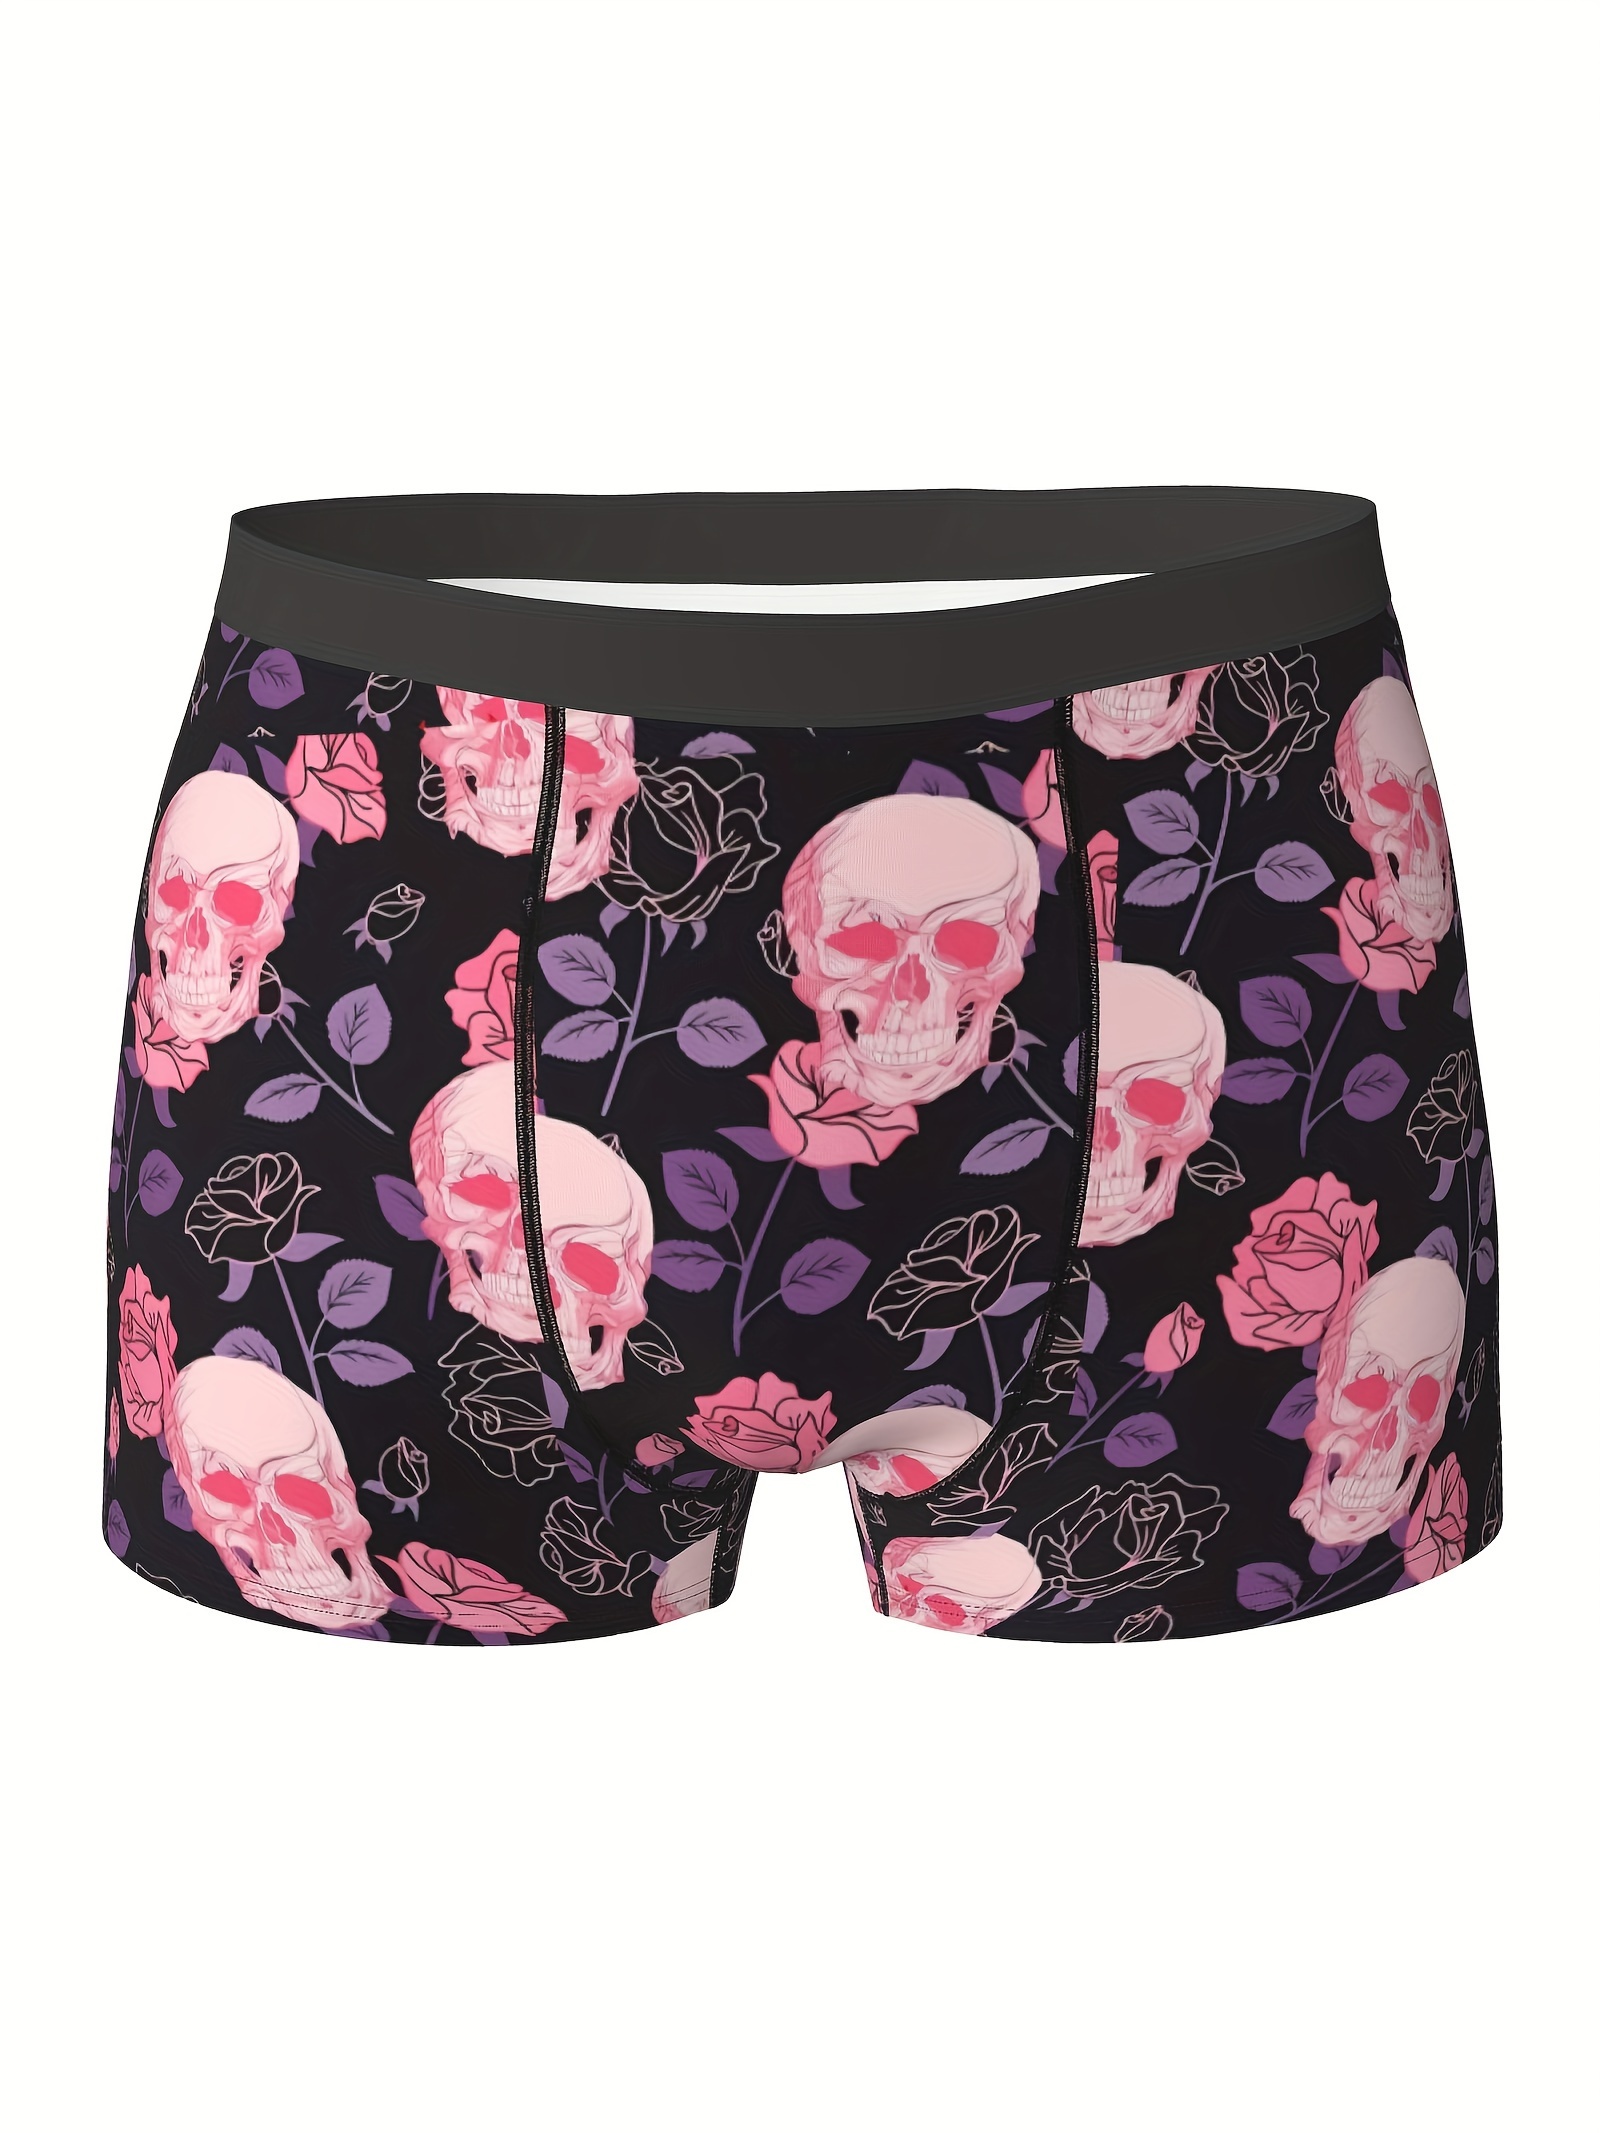 mens halloween skull horror pattern fashion novelty boxer briefs shorts sexy breathable comfy stretchy boxer trunks mens underwear details 0